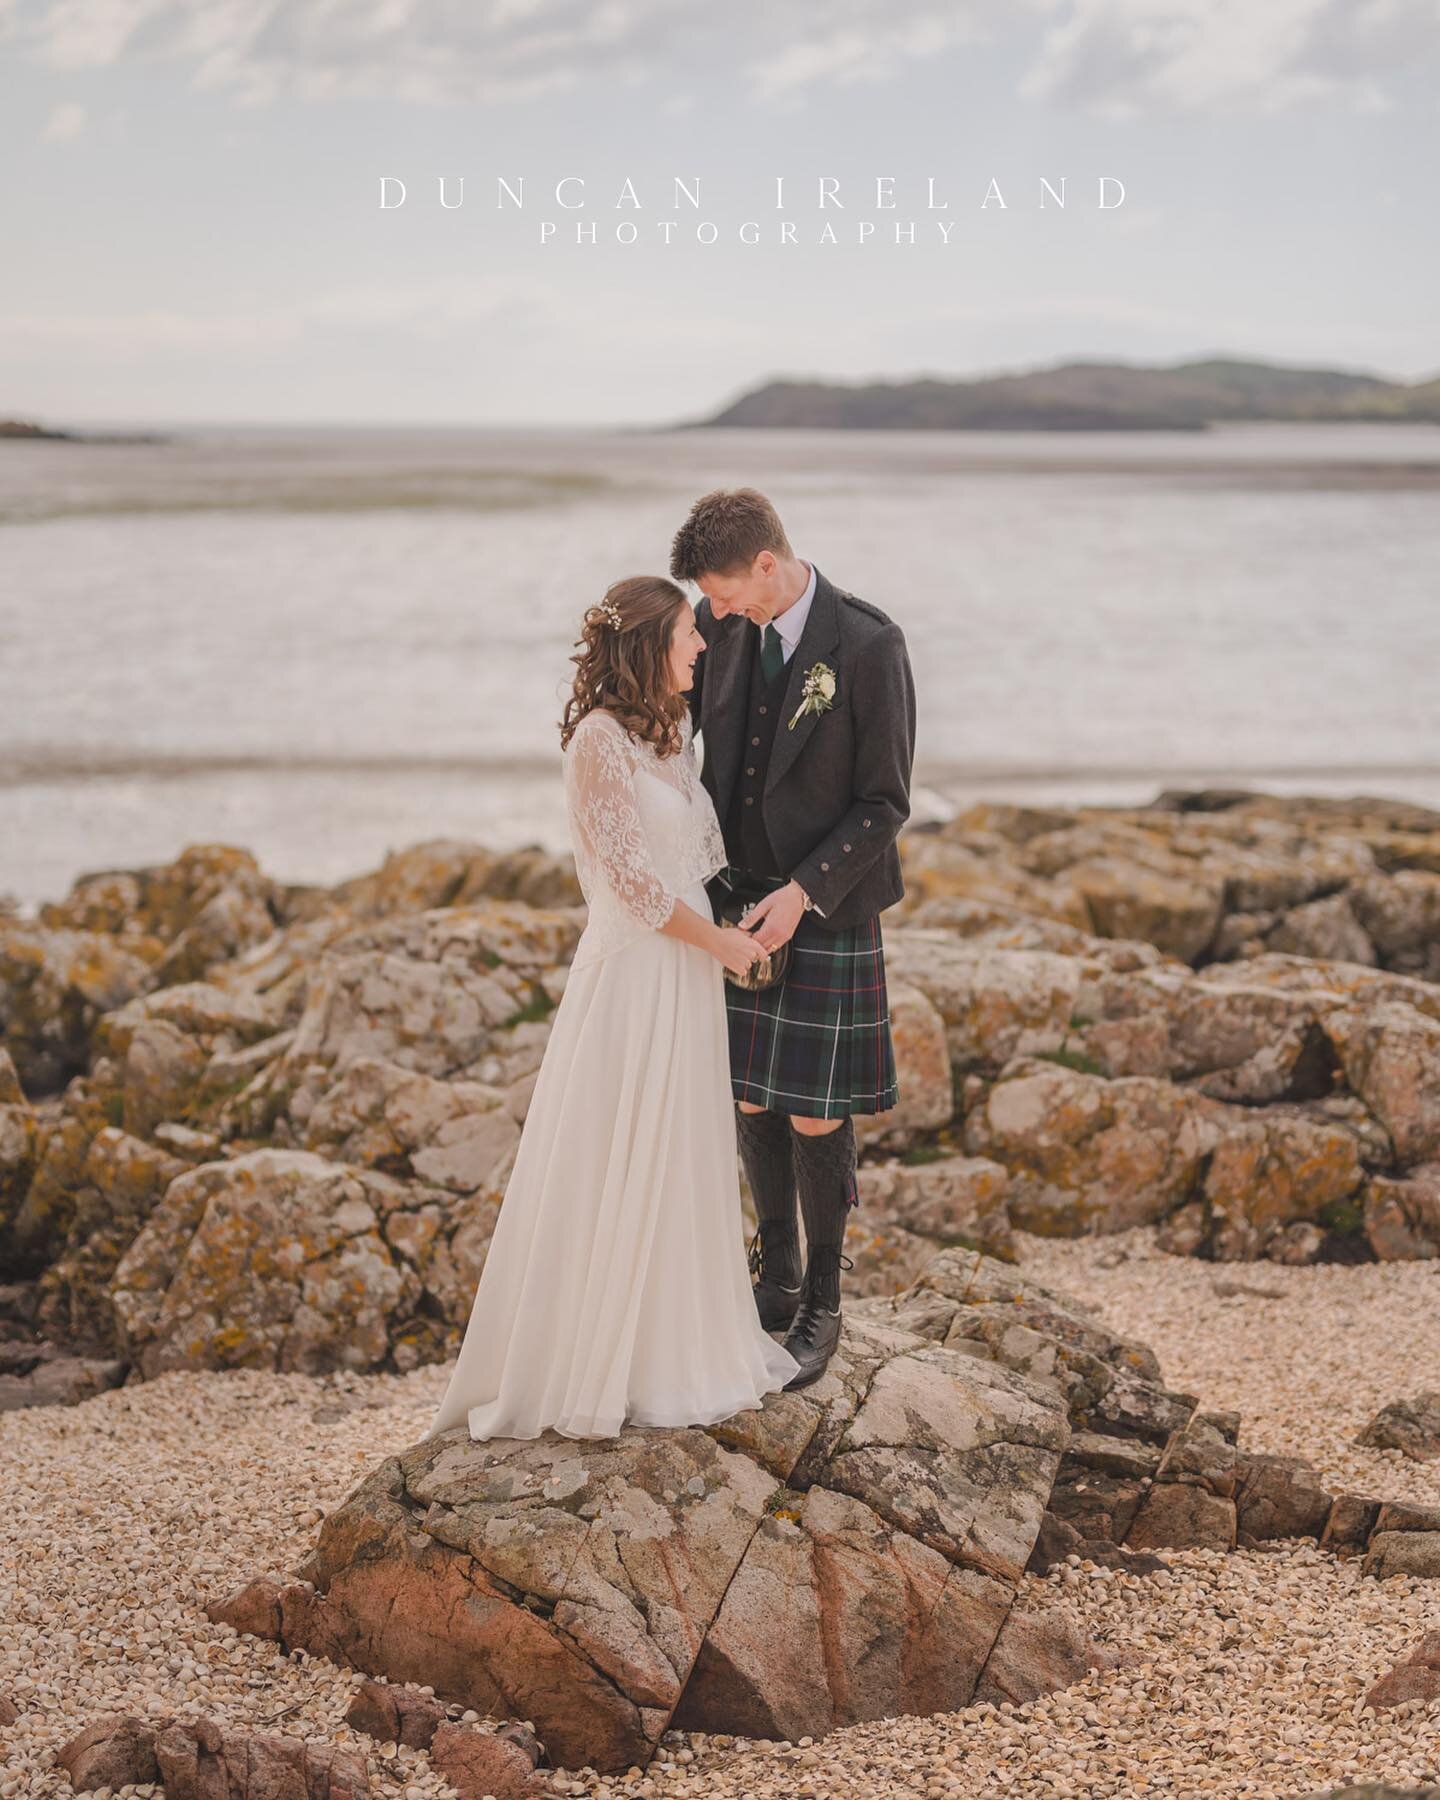 I&rsquo;ve spent a lot of happy days on this beach - cockle shells crunching underfoot&hellip; And, at last I was lucky enough to photograph Lucy and Calum&rsquo;s wedding here.  Kippford, with its unbelievable shell beach, pink blushed rocks and vie